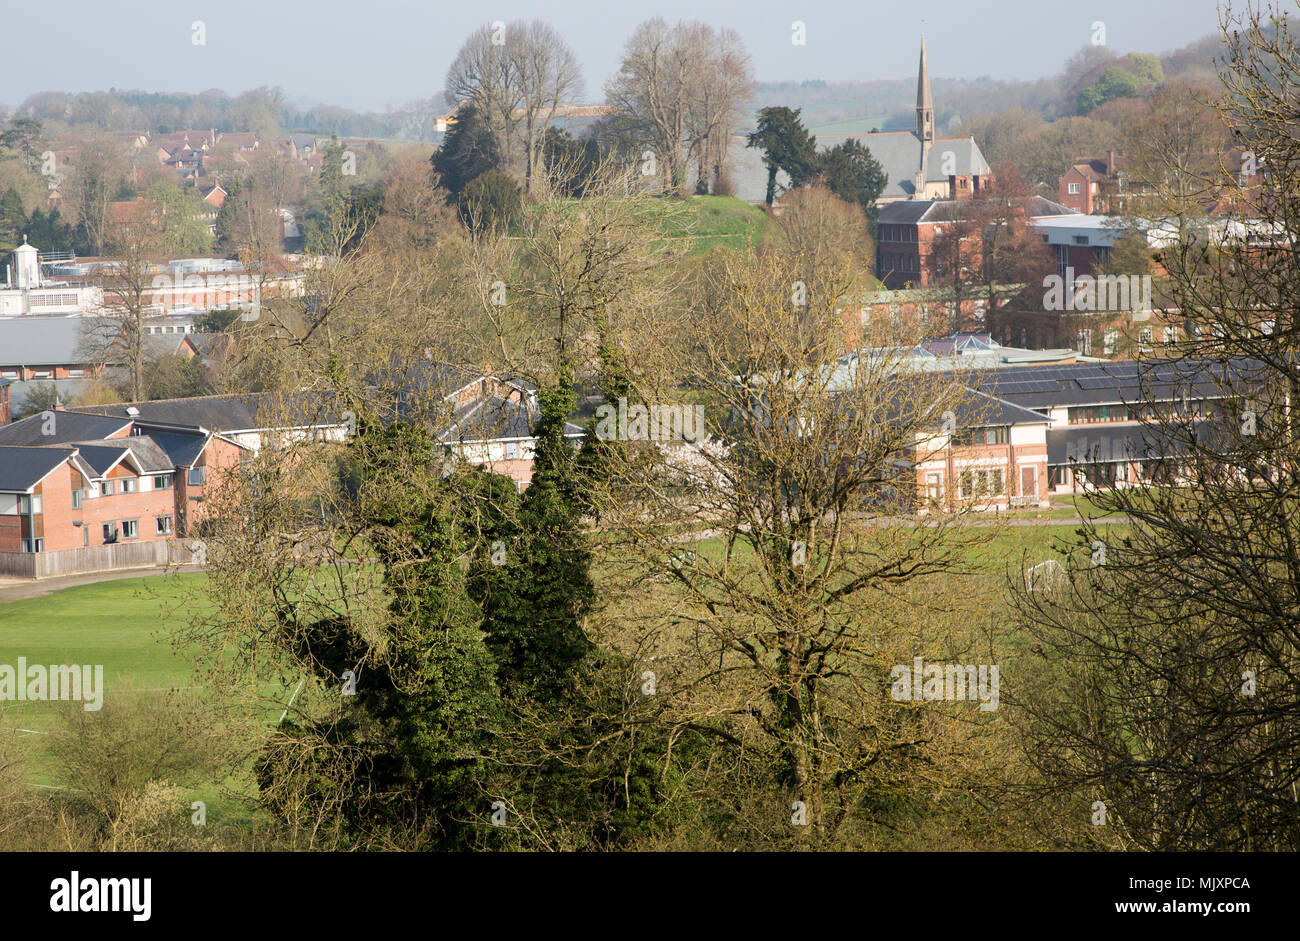 View over buildings and grounds of Marlborough College school, Marlborough, Wiltshire, England, UK Stock Photo